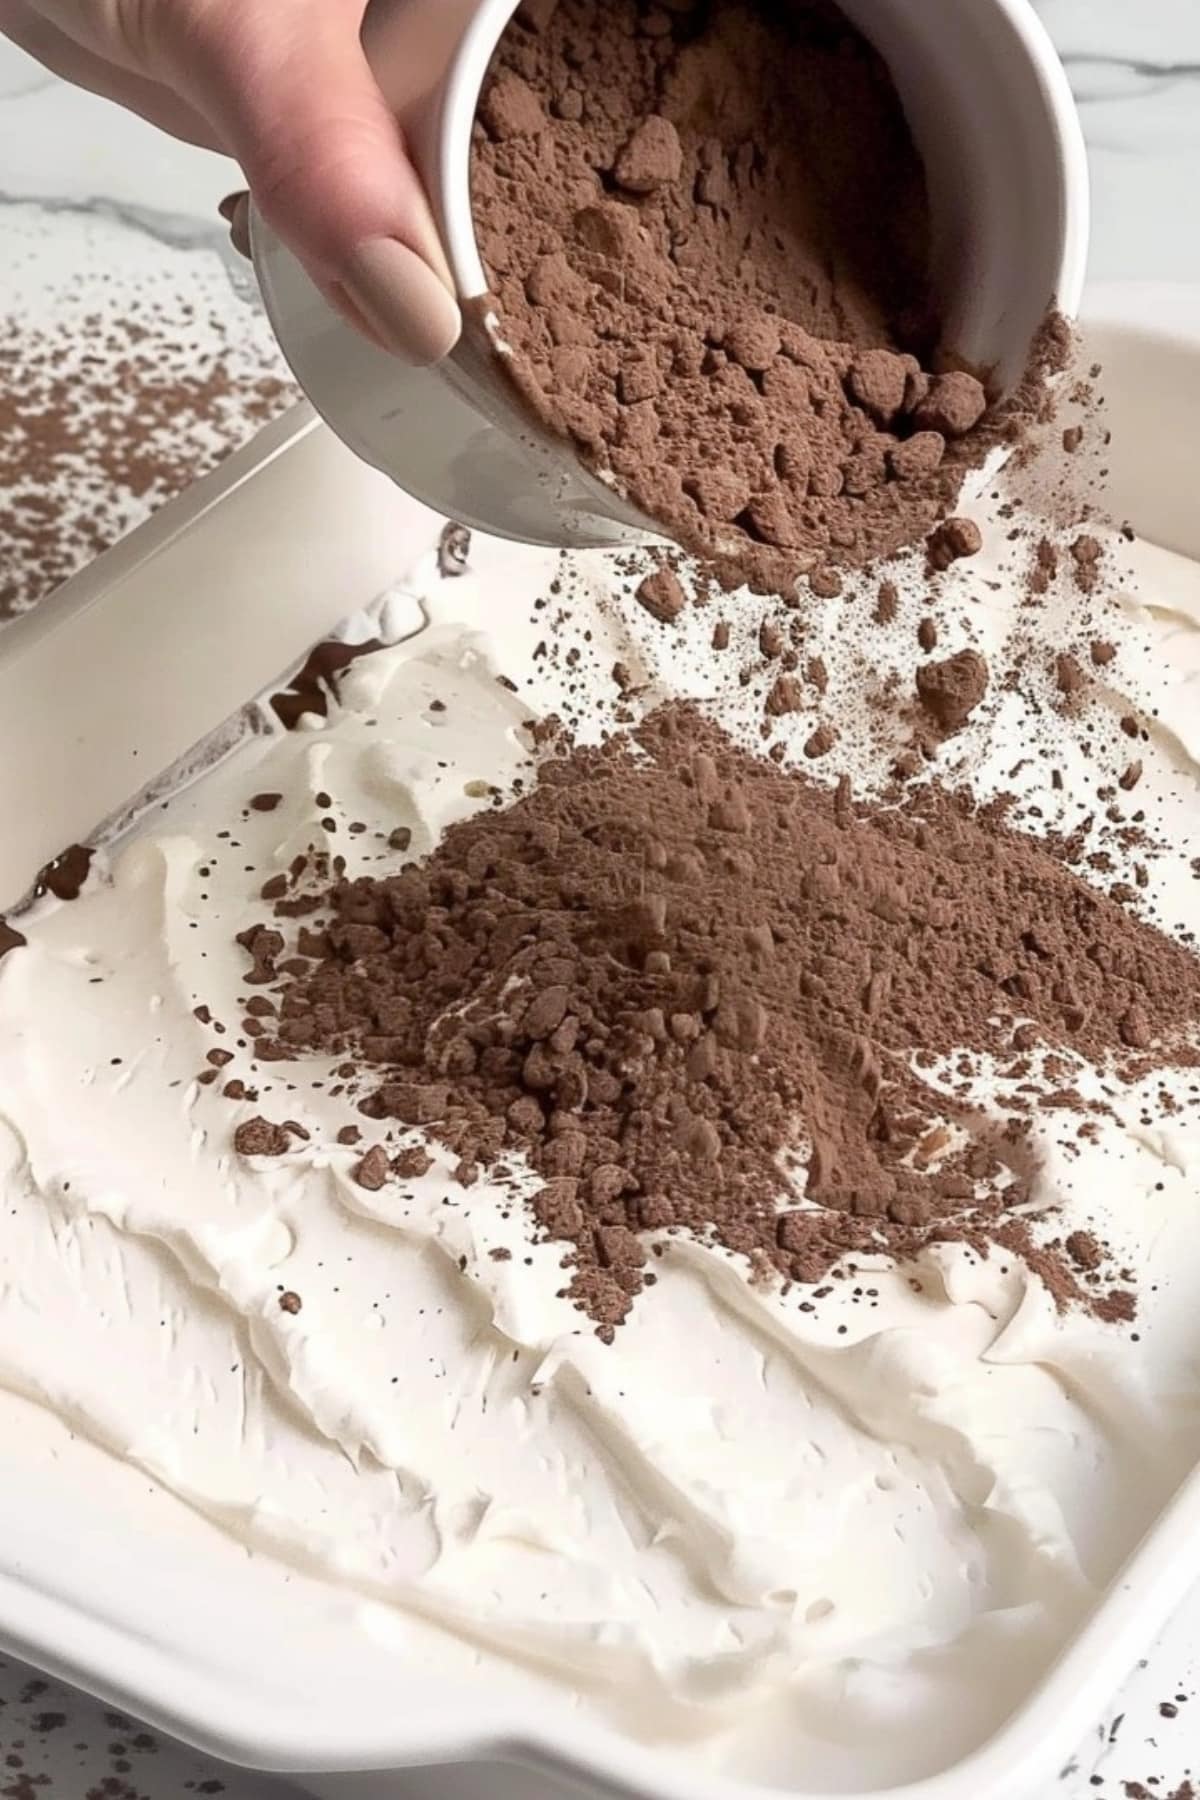 Chocolate cake mix poured on top of whipped cream.